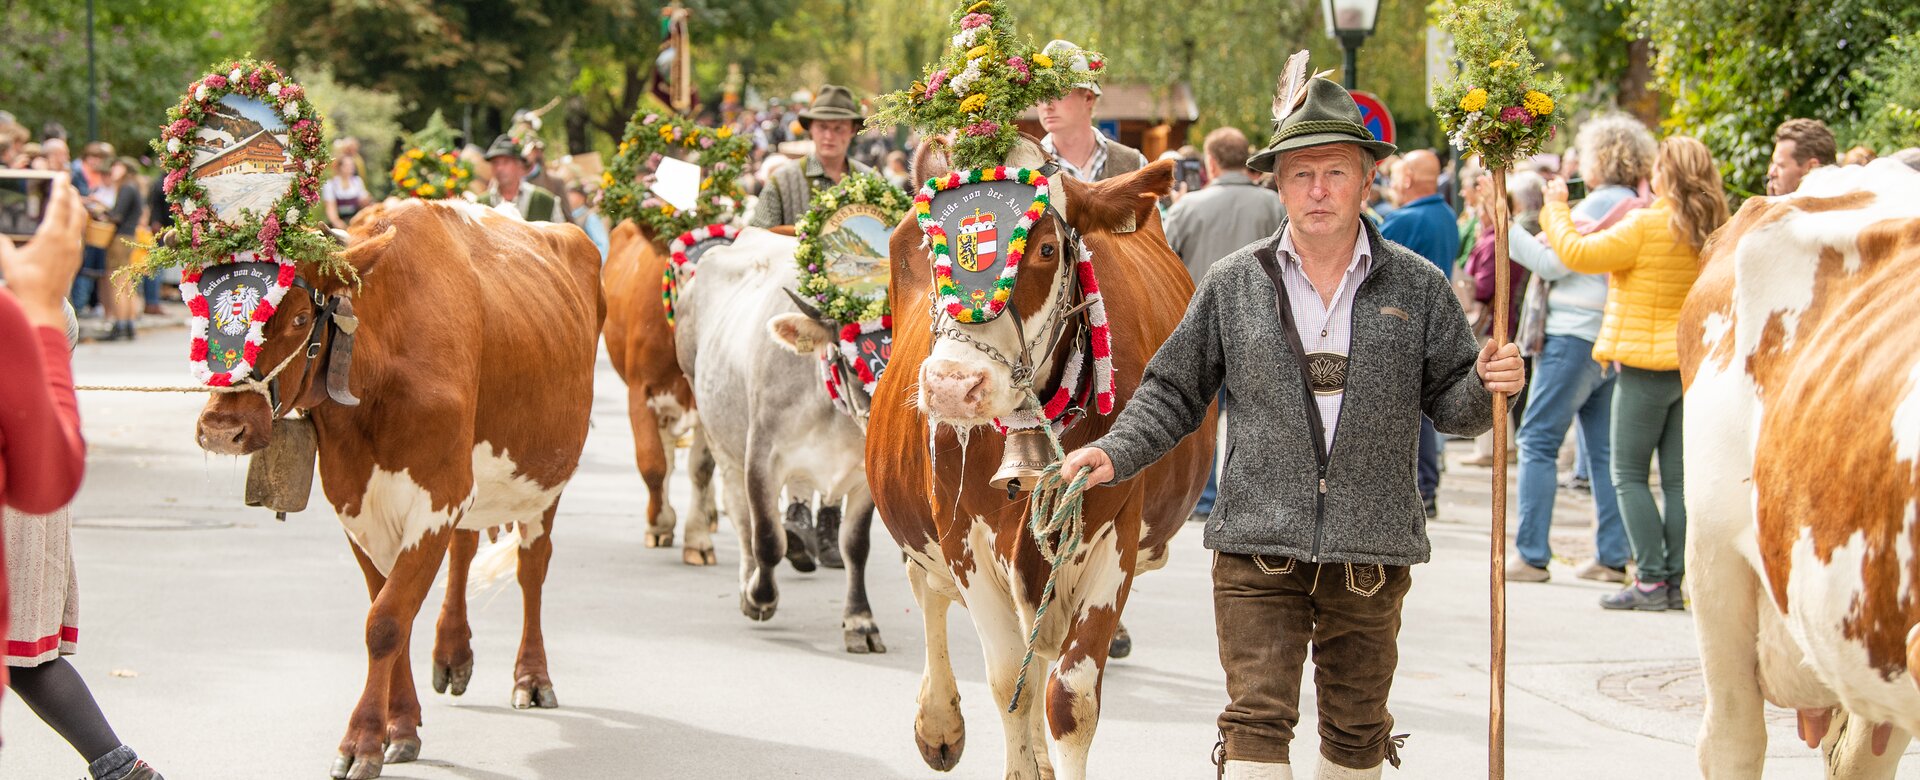 A farmer leads the harvest procession with a decorated cow | © Gasteinertal Tourismus GmbH